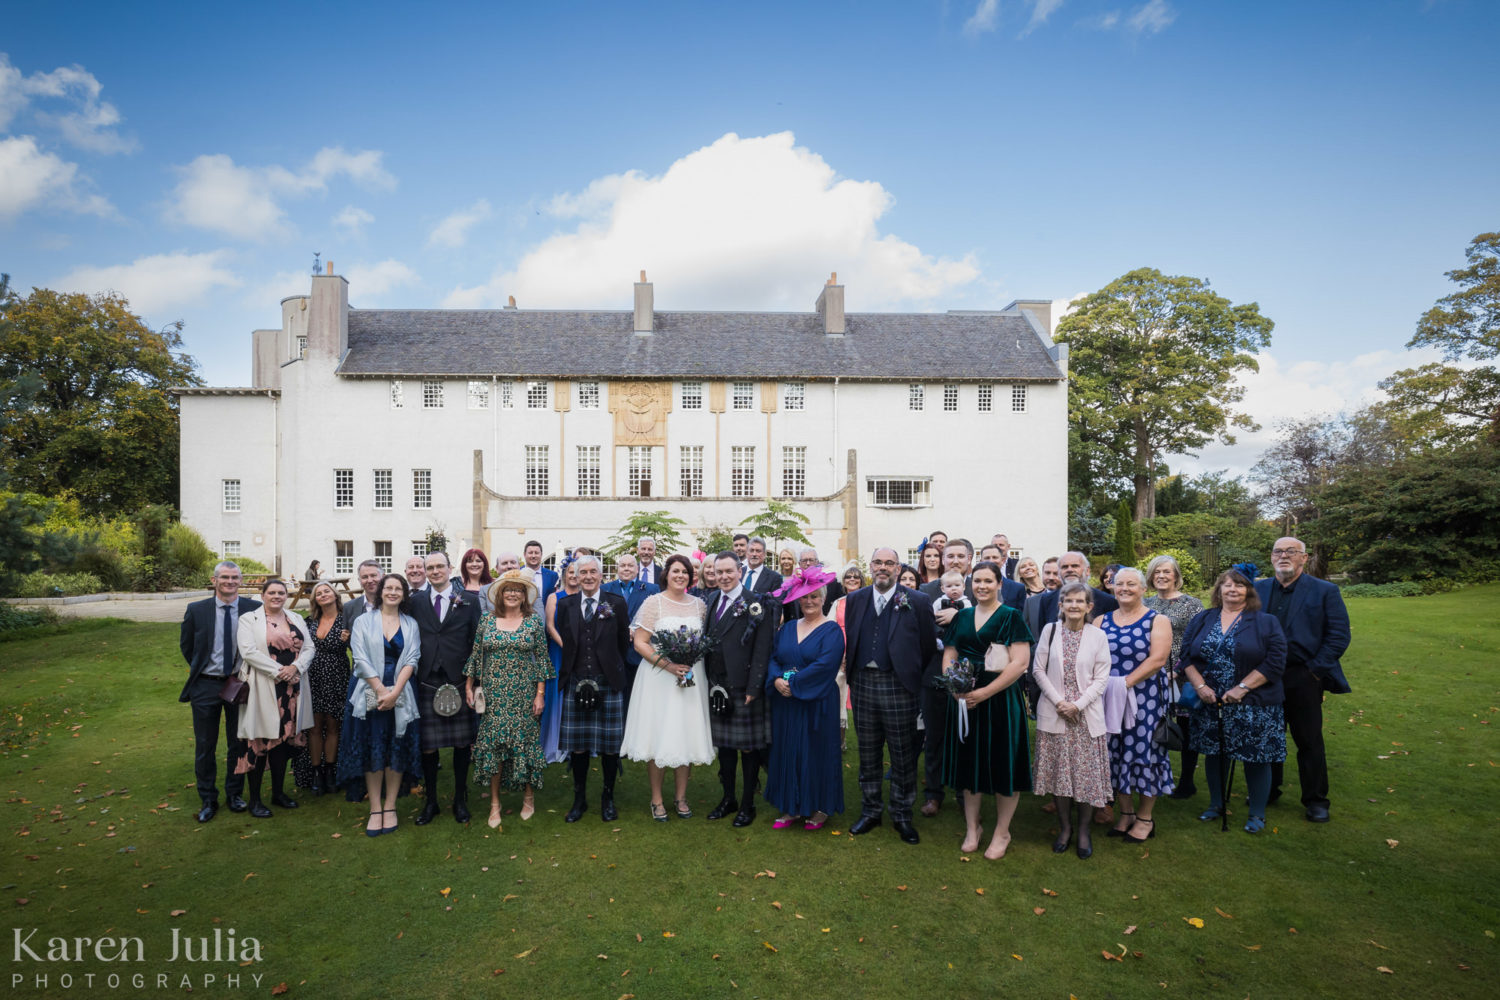 big group photo of all guests with House for an Art Lover in the background